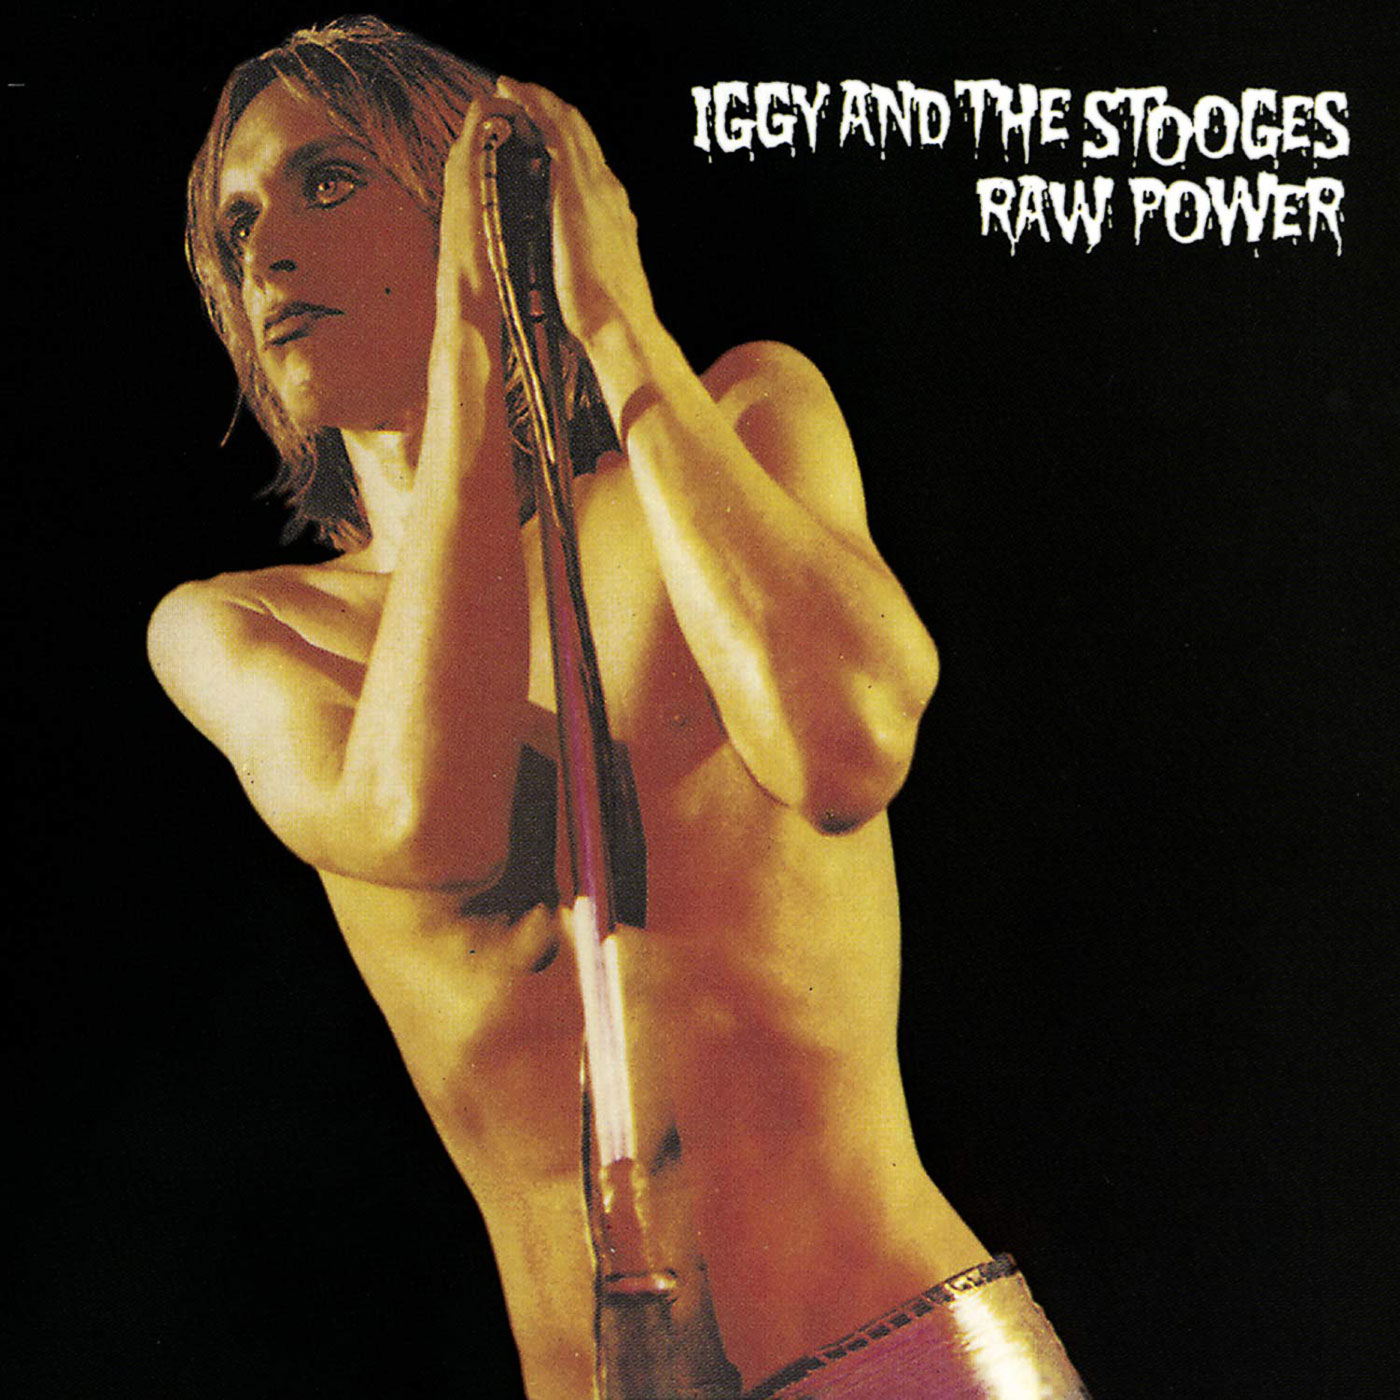 298 Iggy and the Stooges – Raw Power